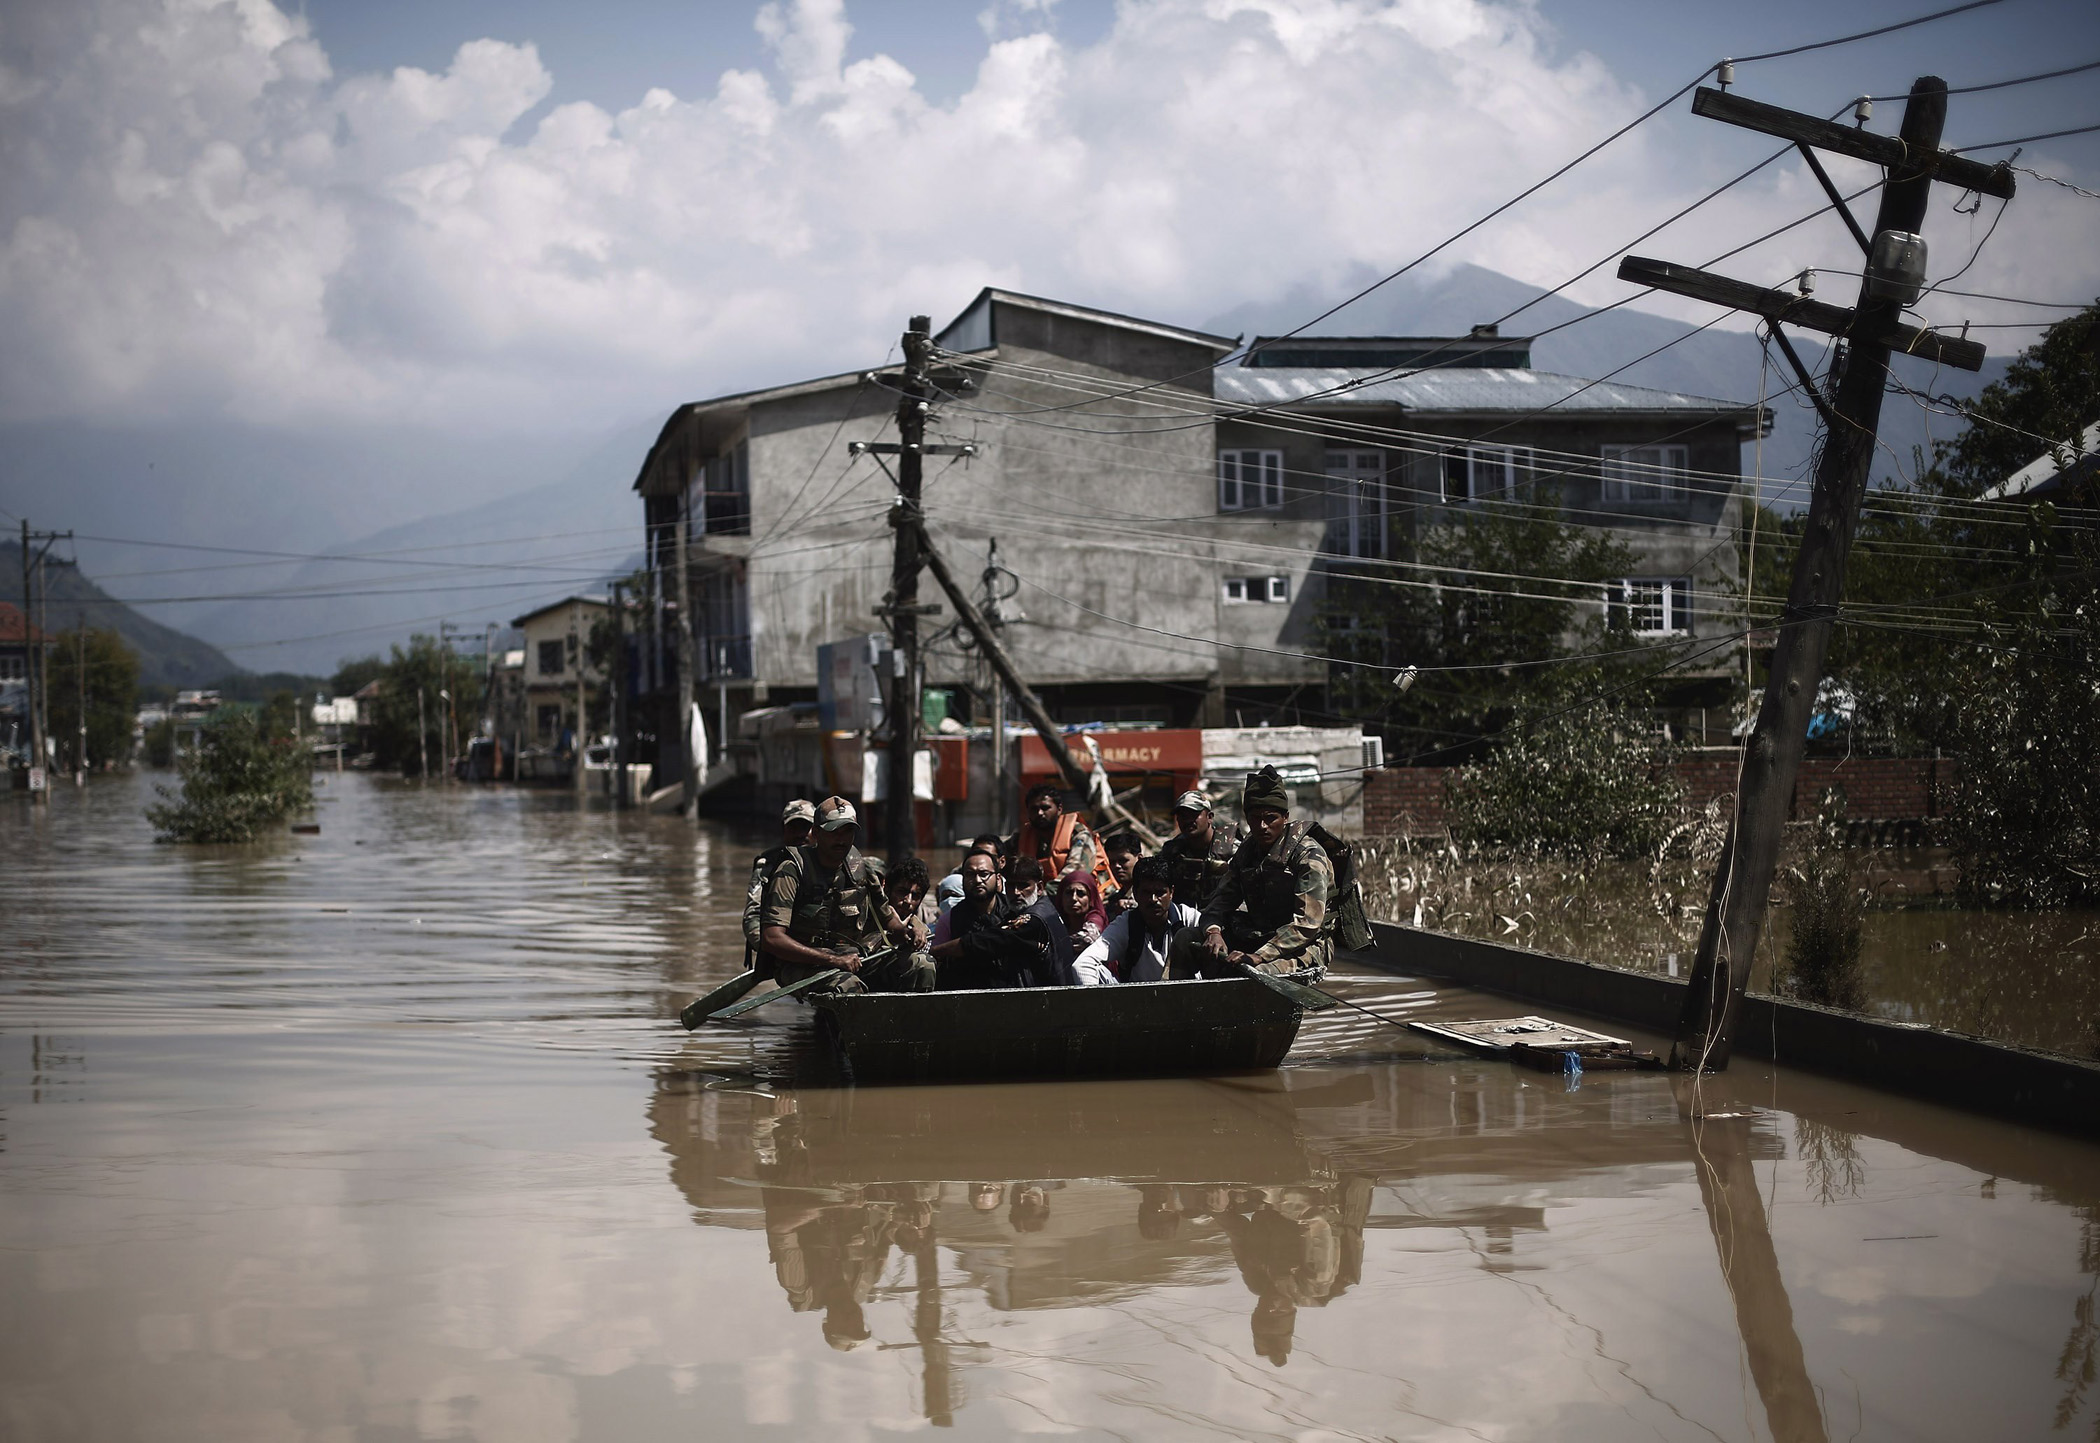 Indian army soldiers evacuate flood victims by a boat to a safer place in Srinagar, Sept. 13, 2014.